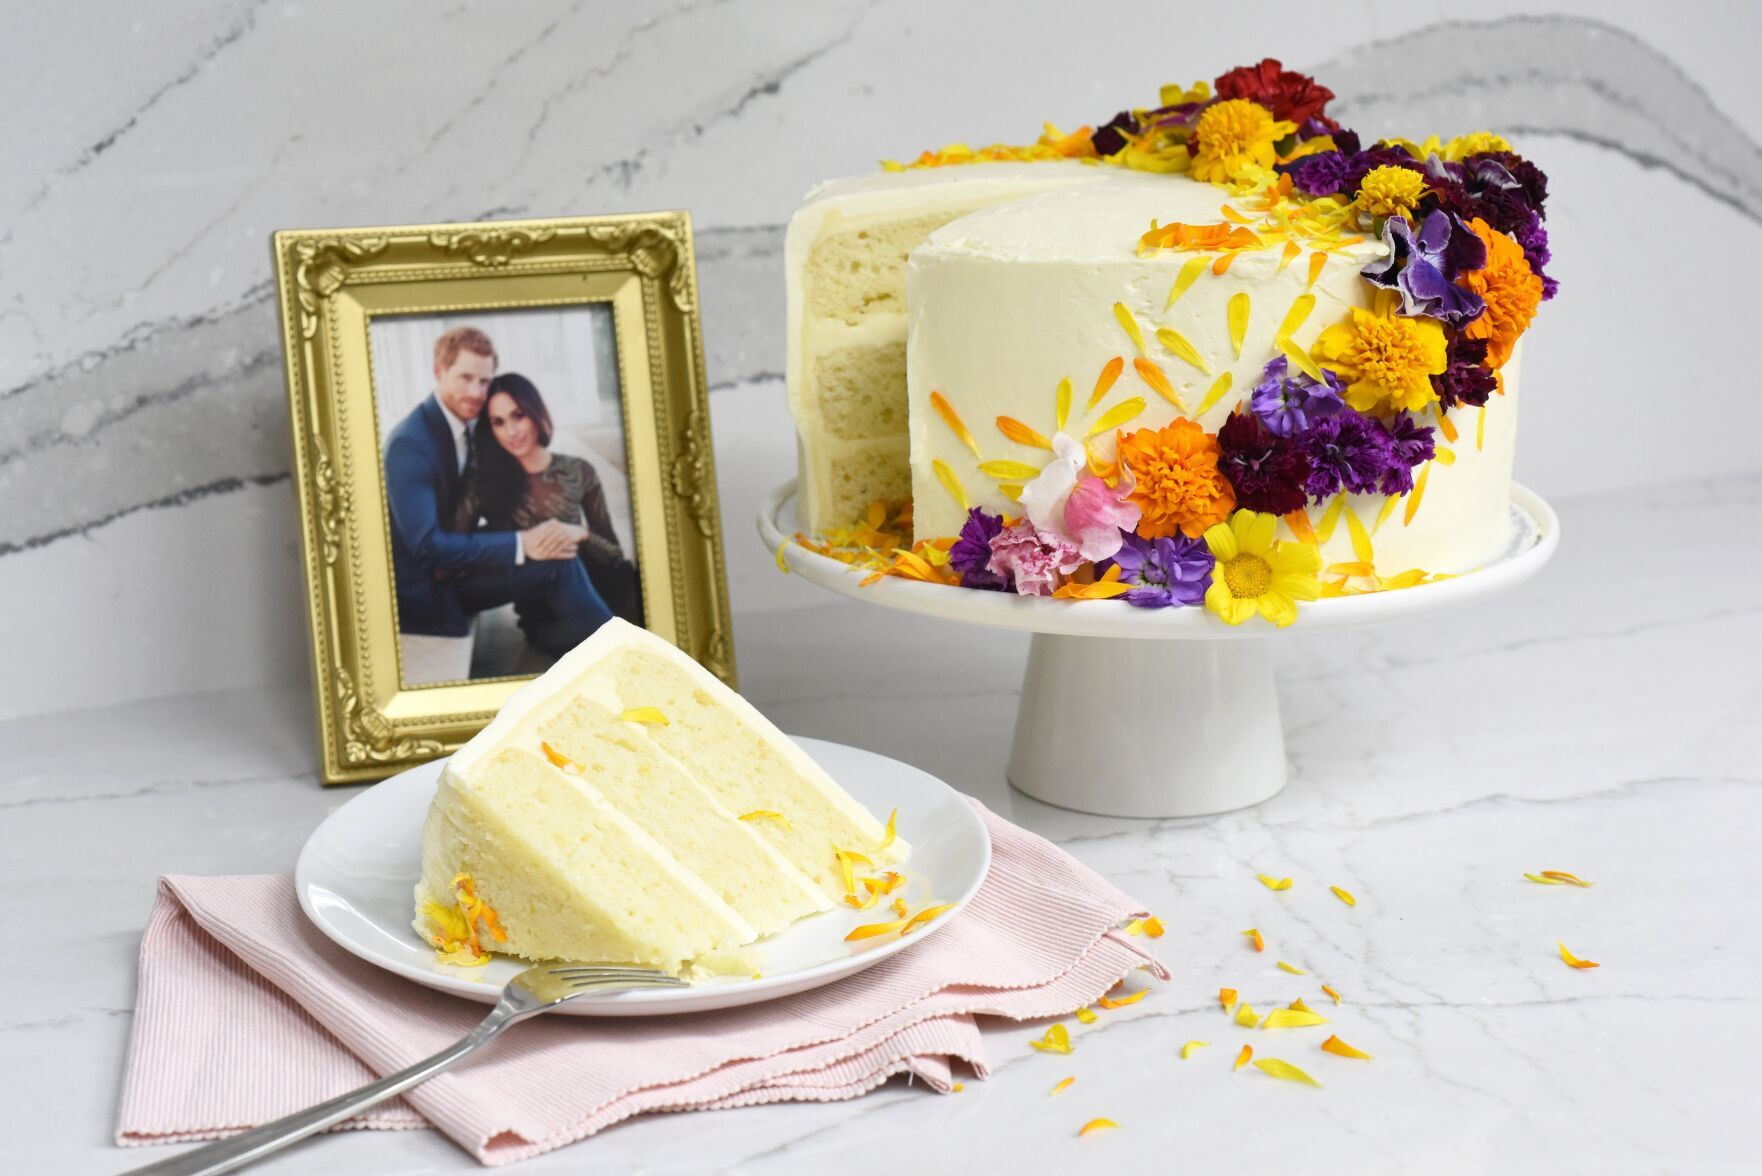 Fresh Flower Wedding Cakes That Could Rival Harry and Meghan's -  Weddingbells